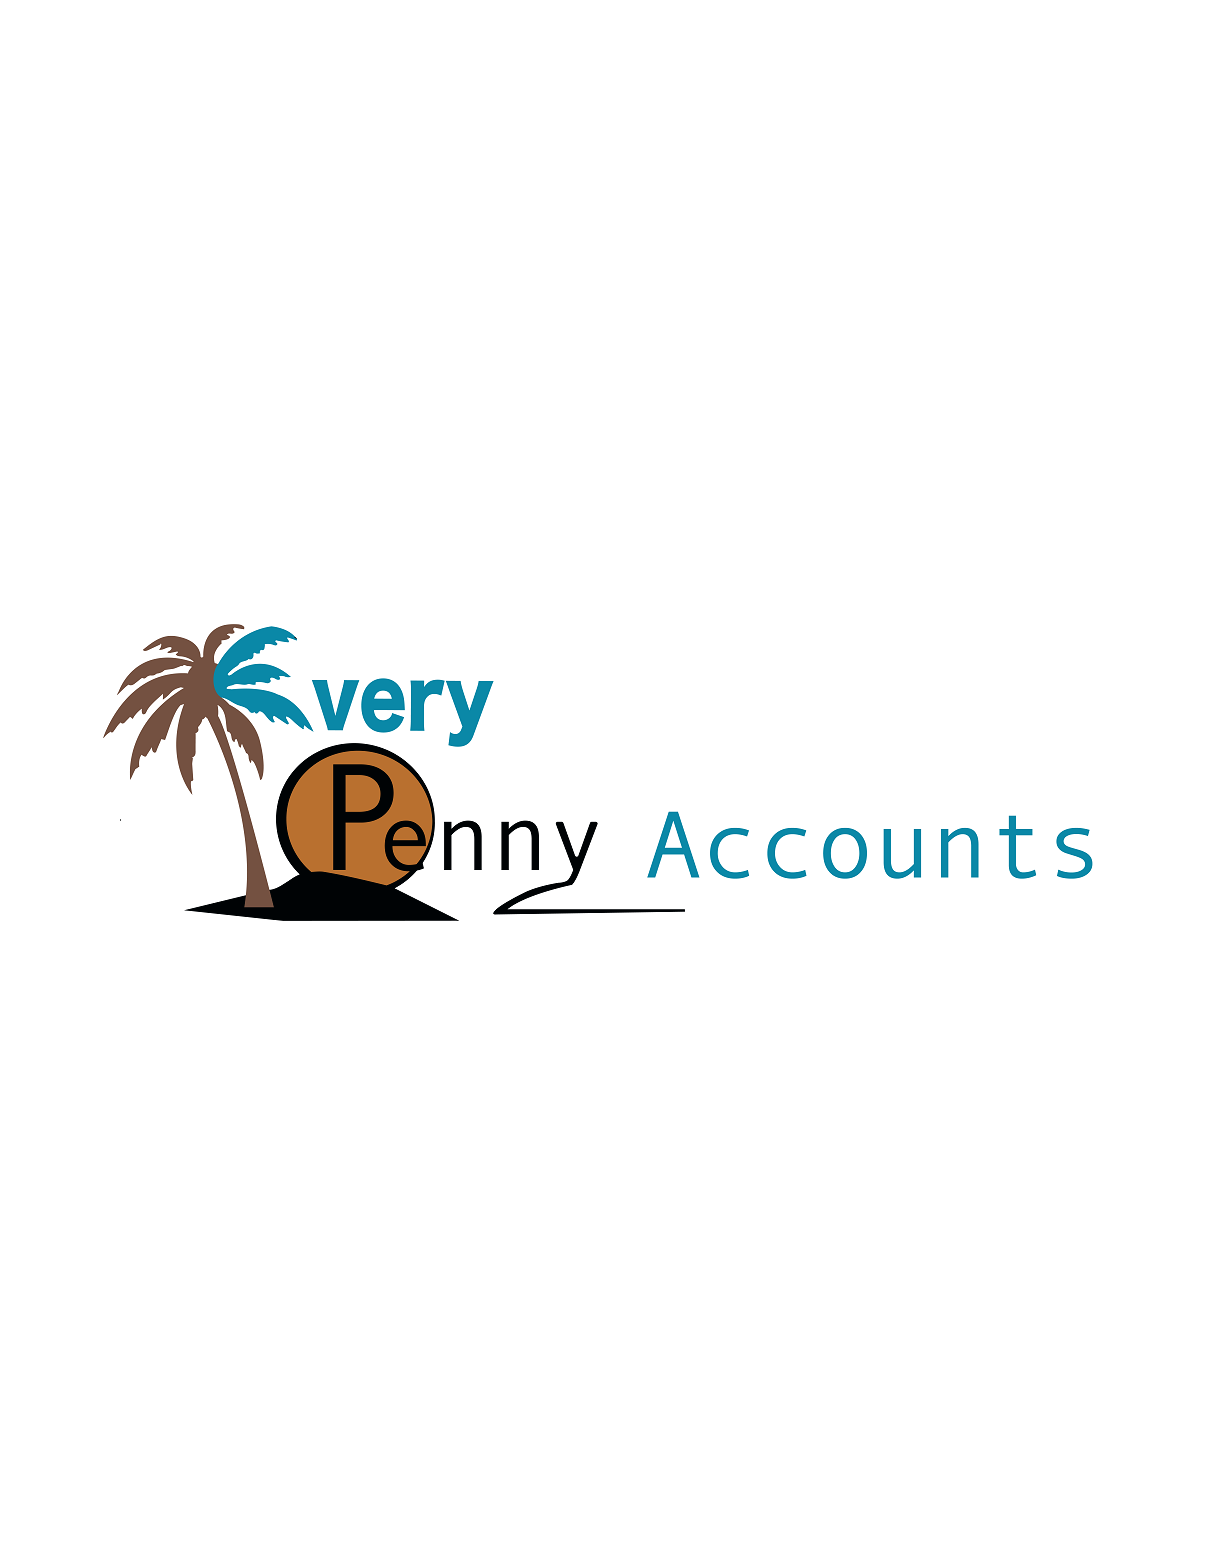 Every Penny Accounts Graphic Art Logo Image